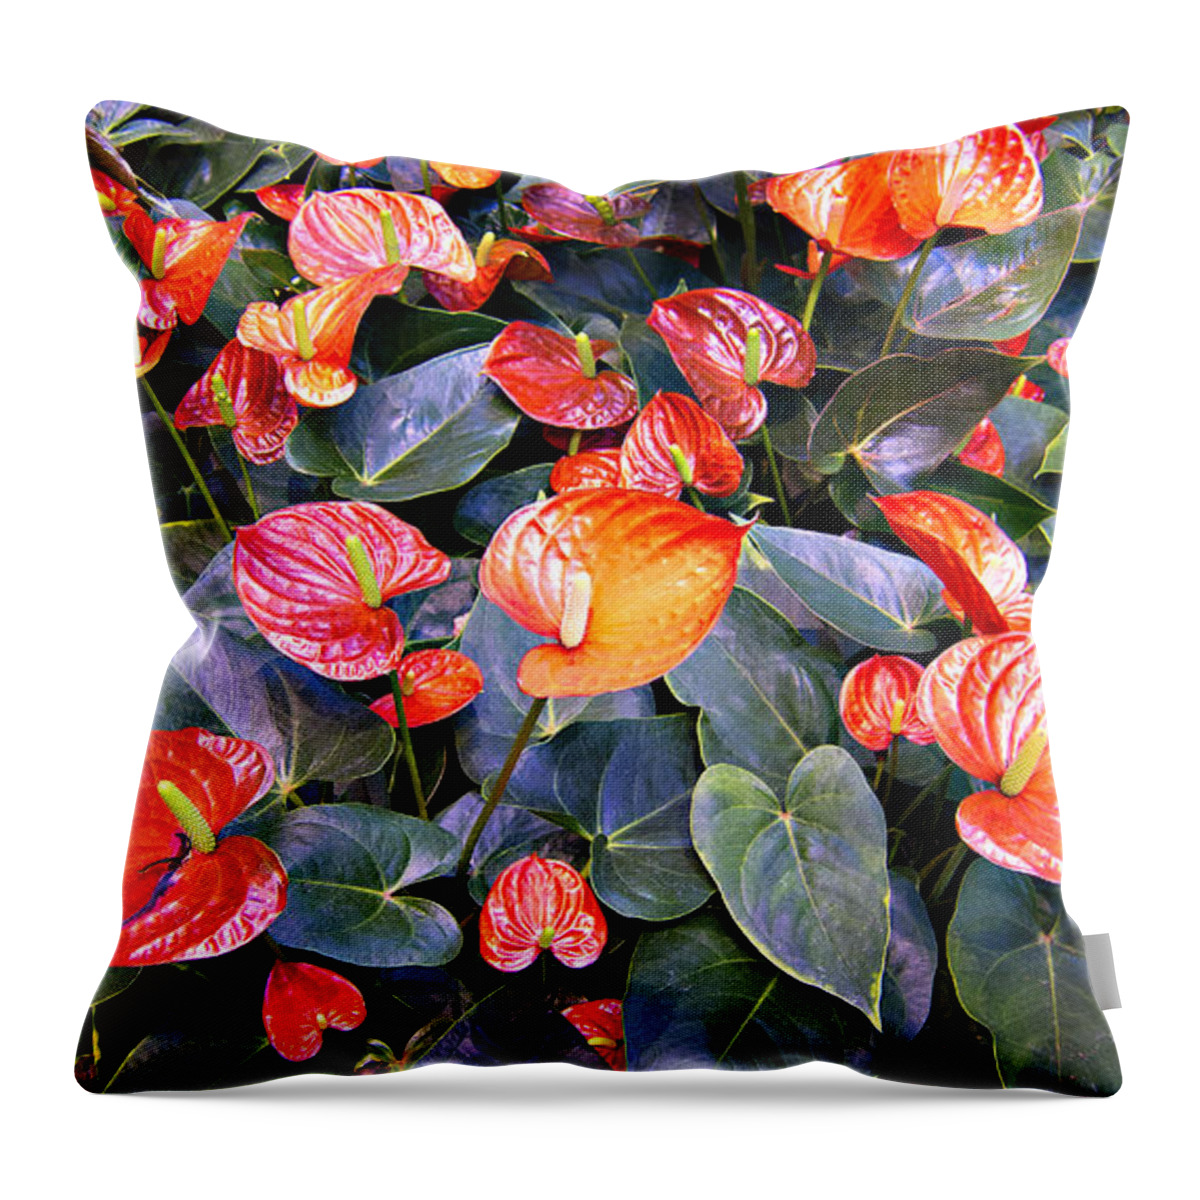 Flamingo Flower Bed Throw Pillow featuring the photograph Flamingo Flower Bed by Douglas Barnard